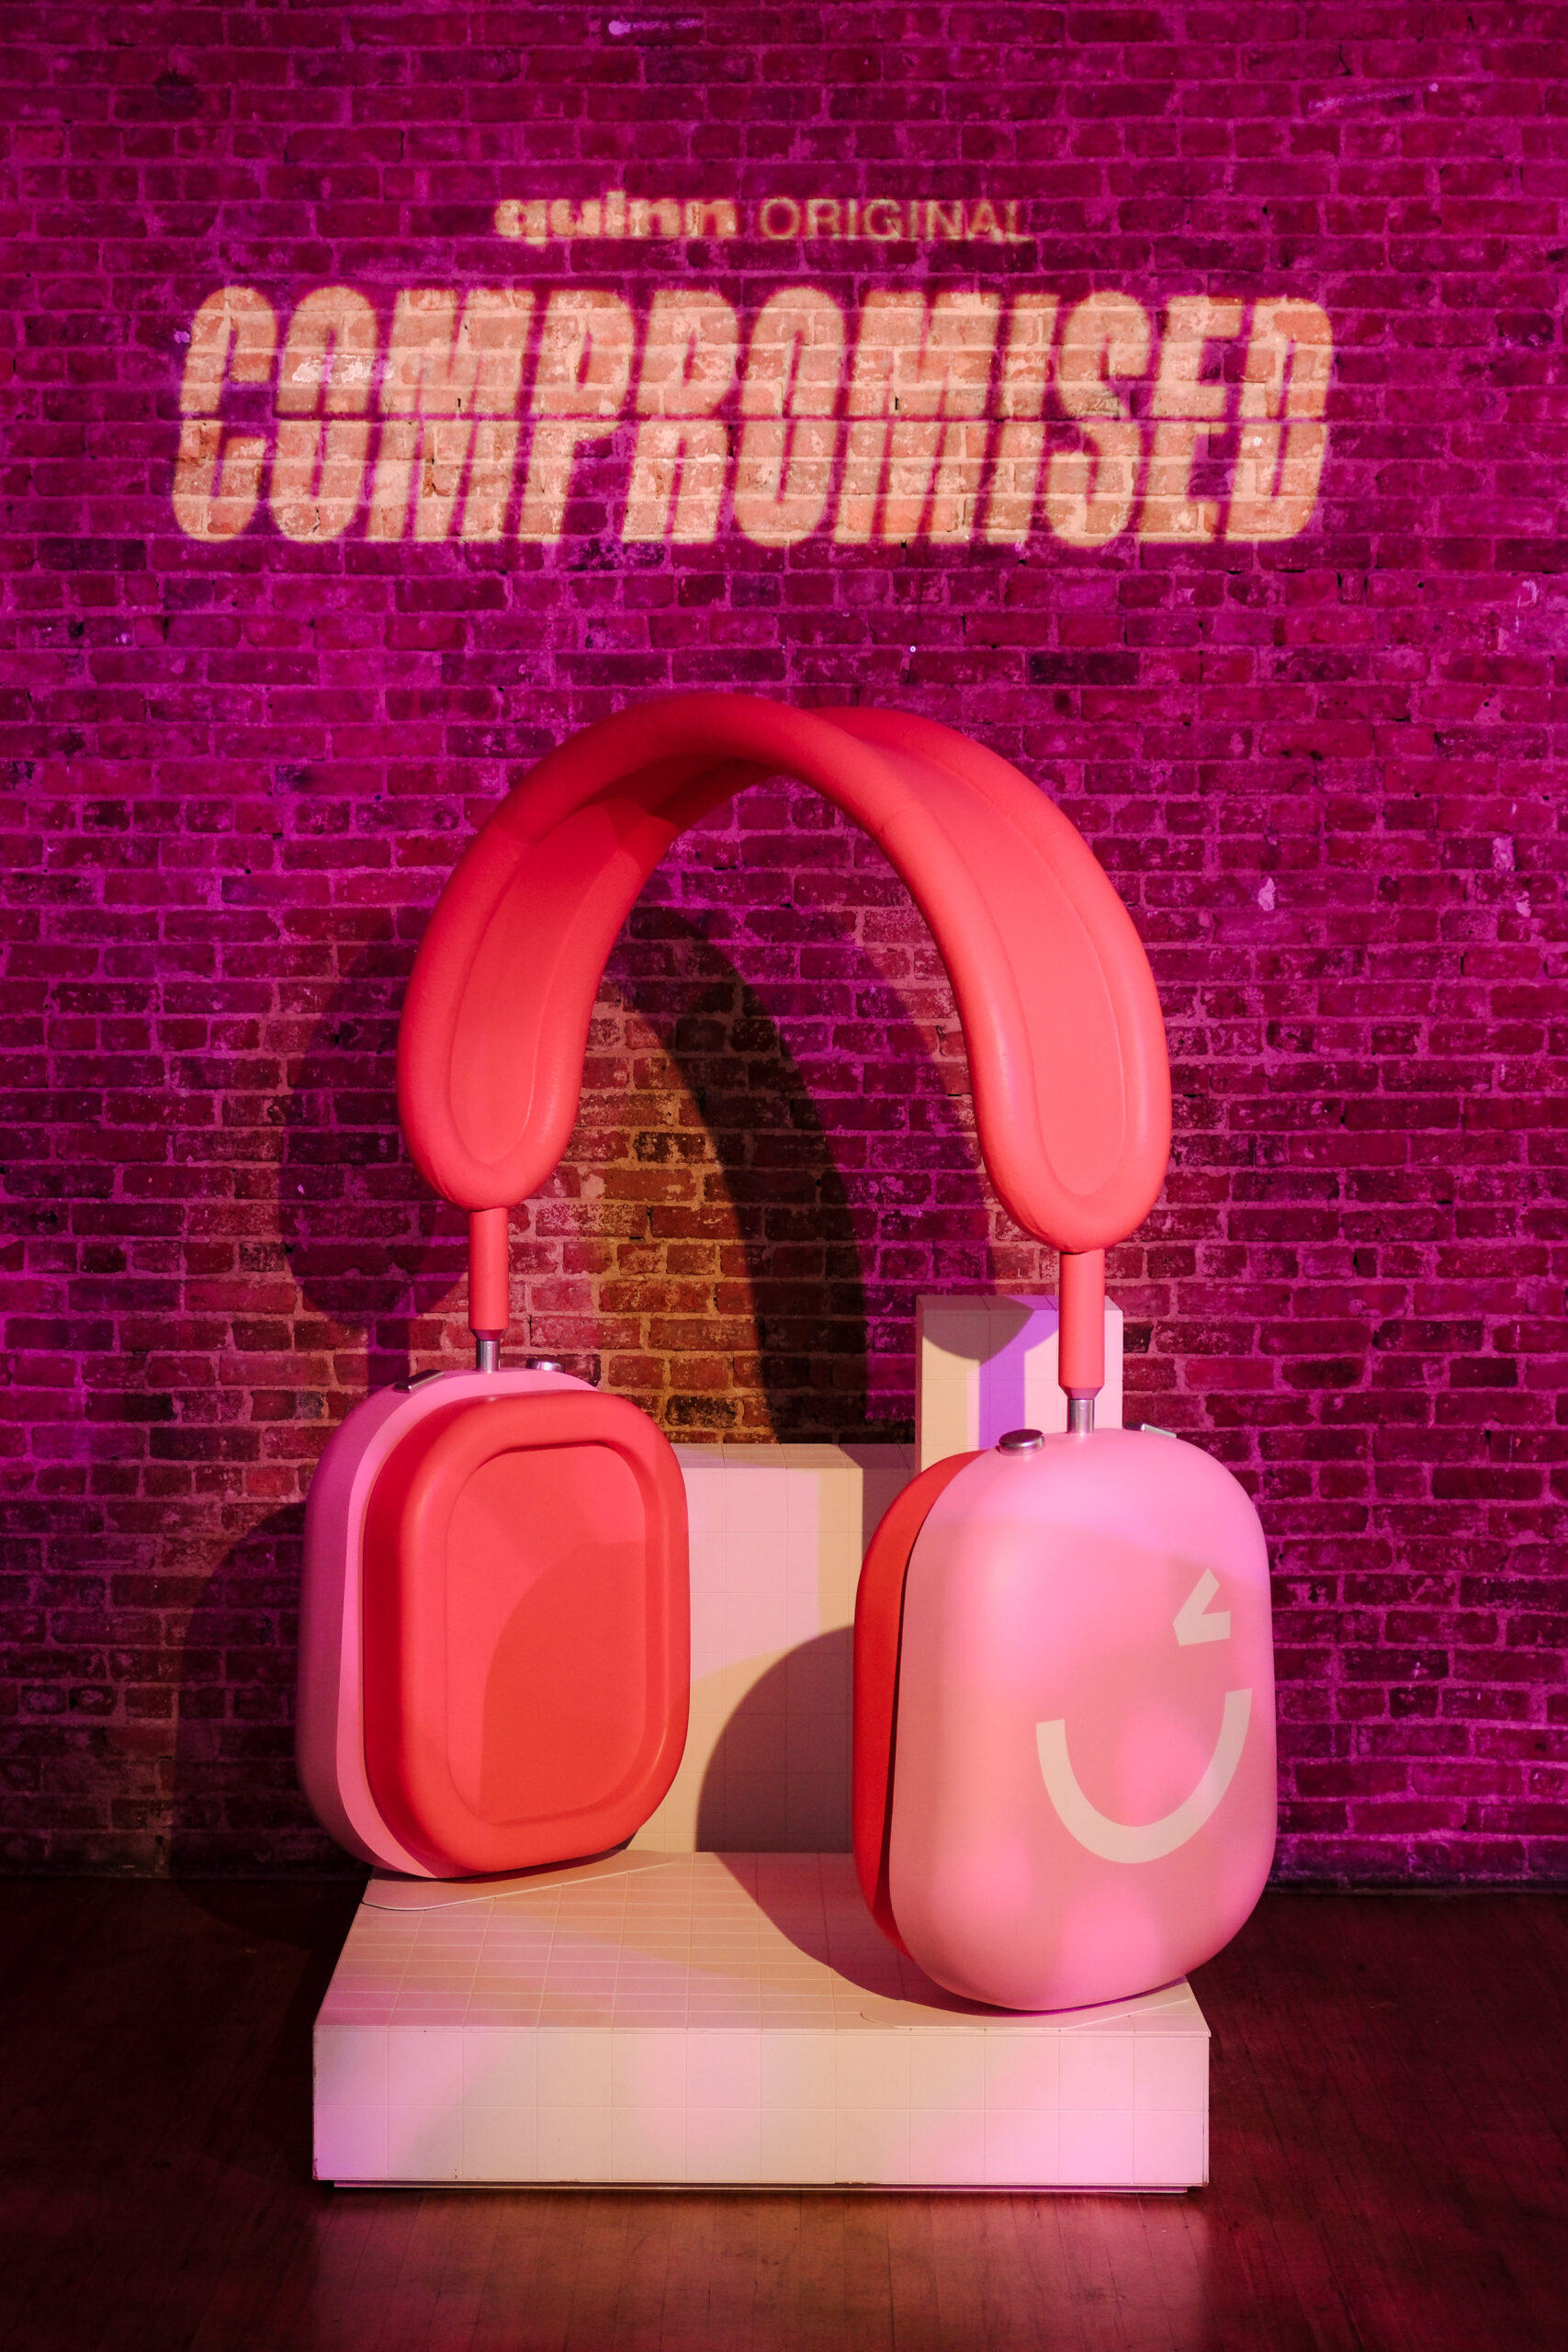 Quinn Podcast “Compromised” Premiere Listening Party